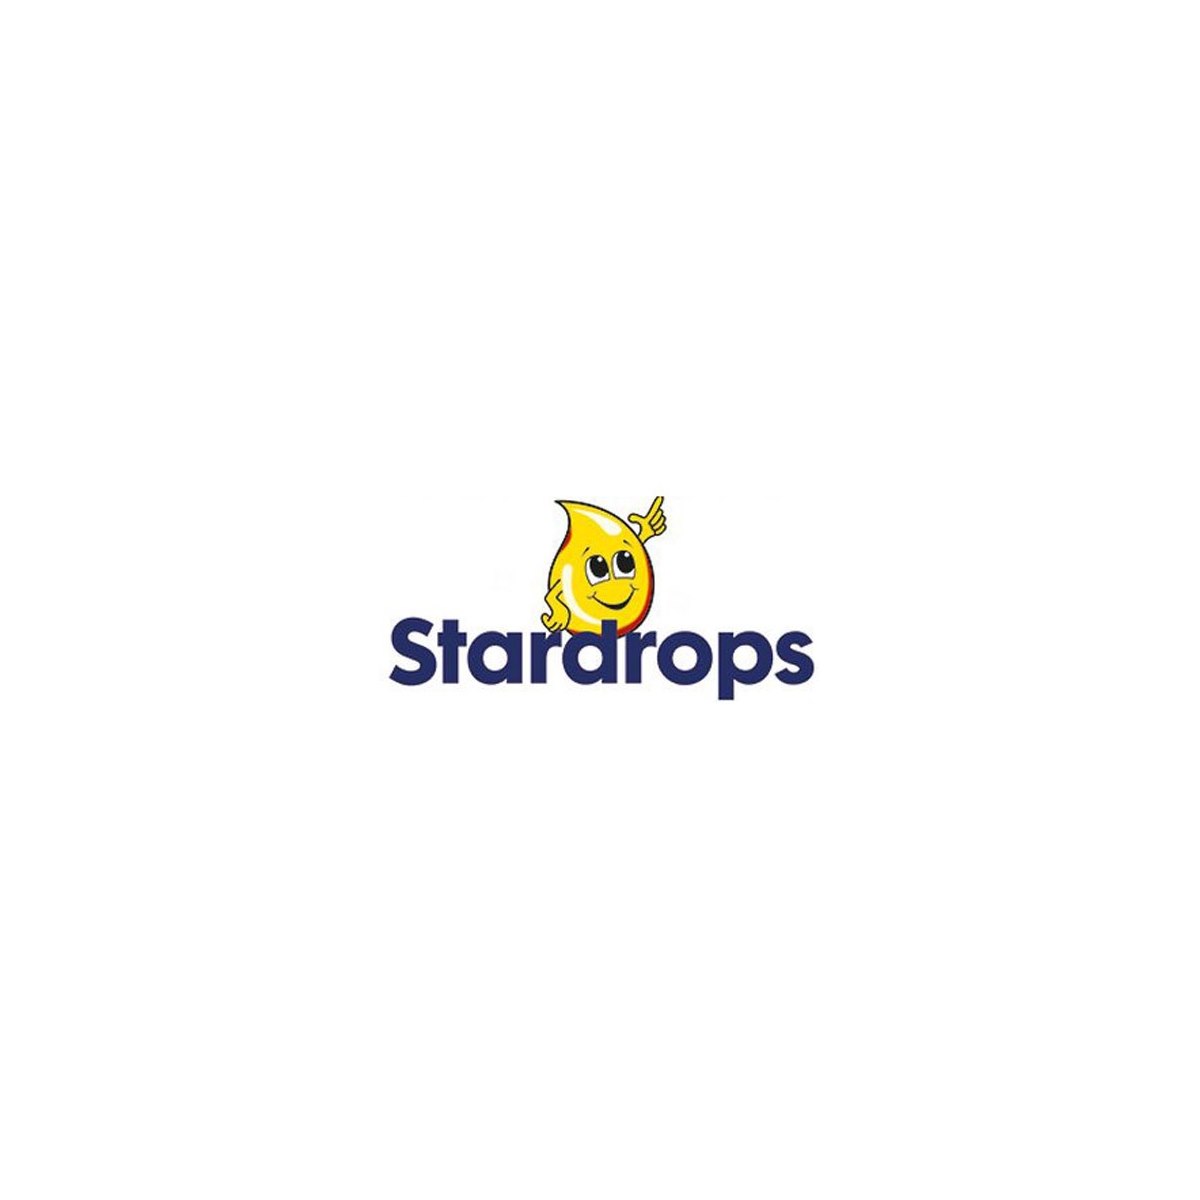 Where to buy stardrops products